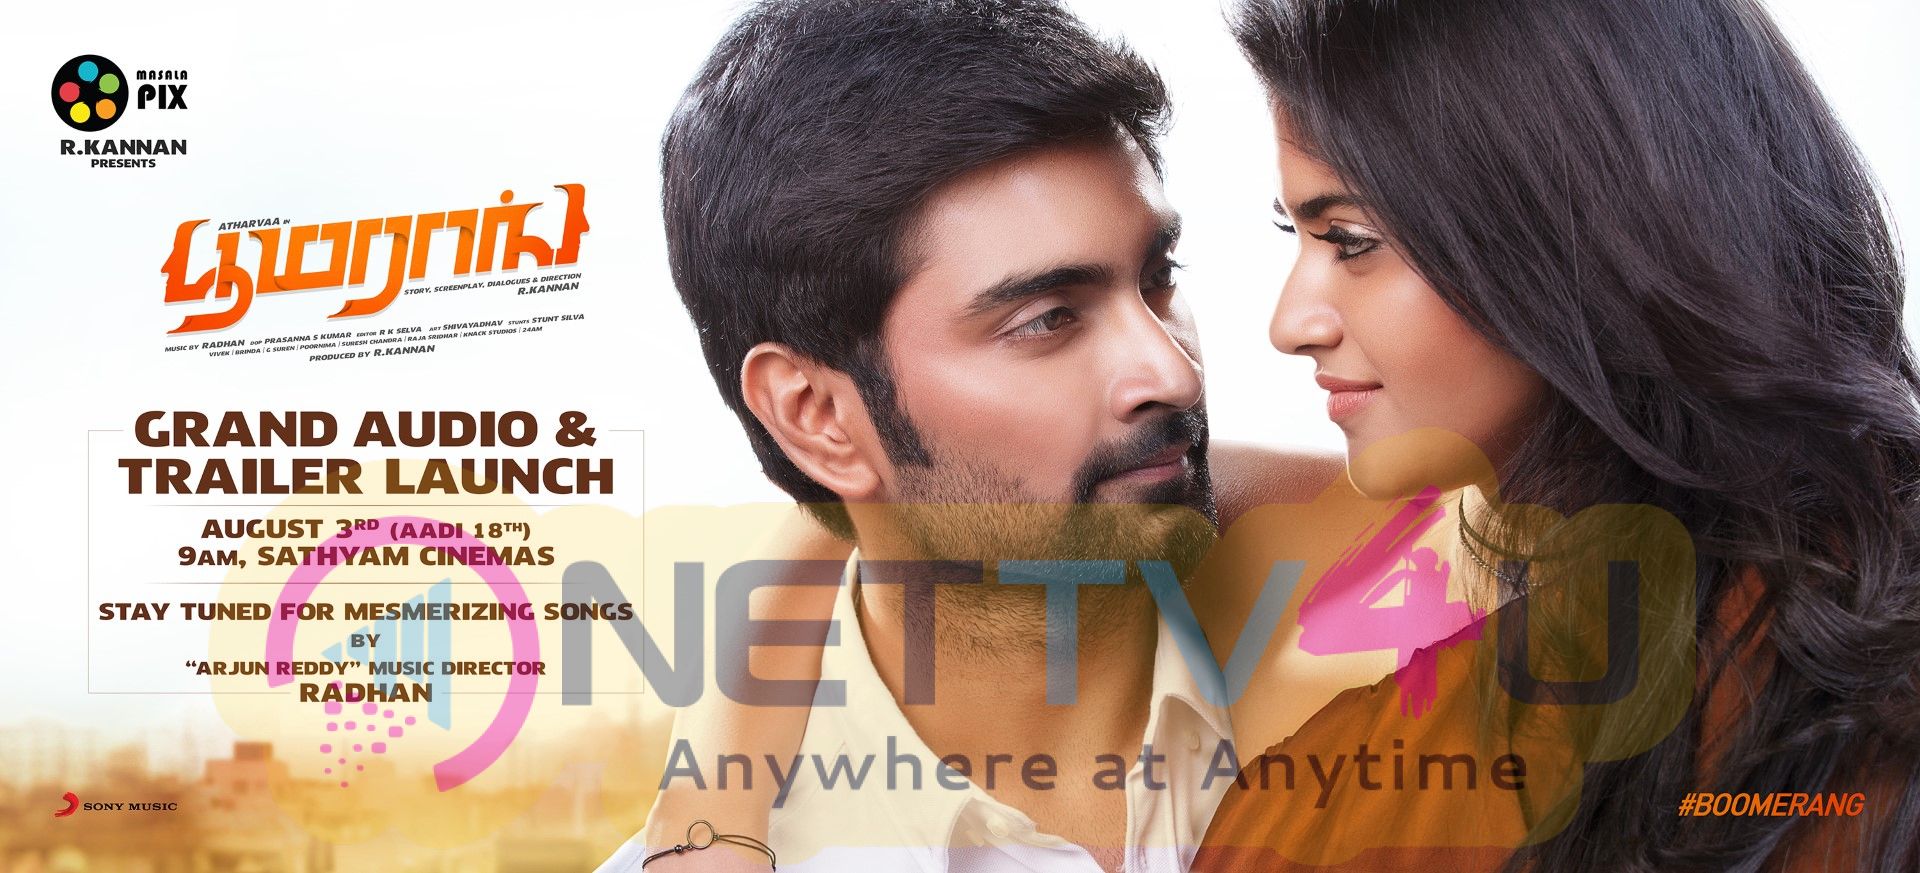 Boomerang Audio Announcement Poster  Tamil Gallery